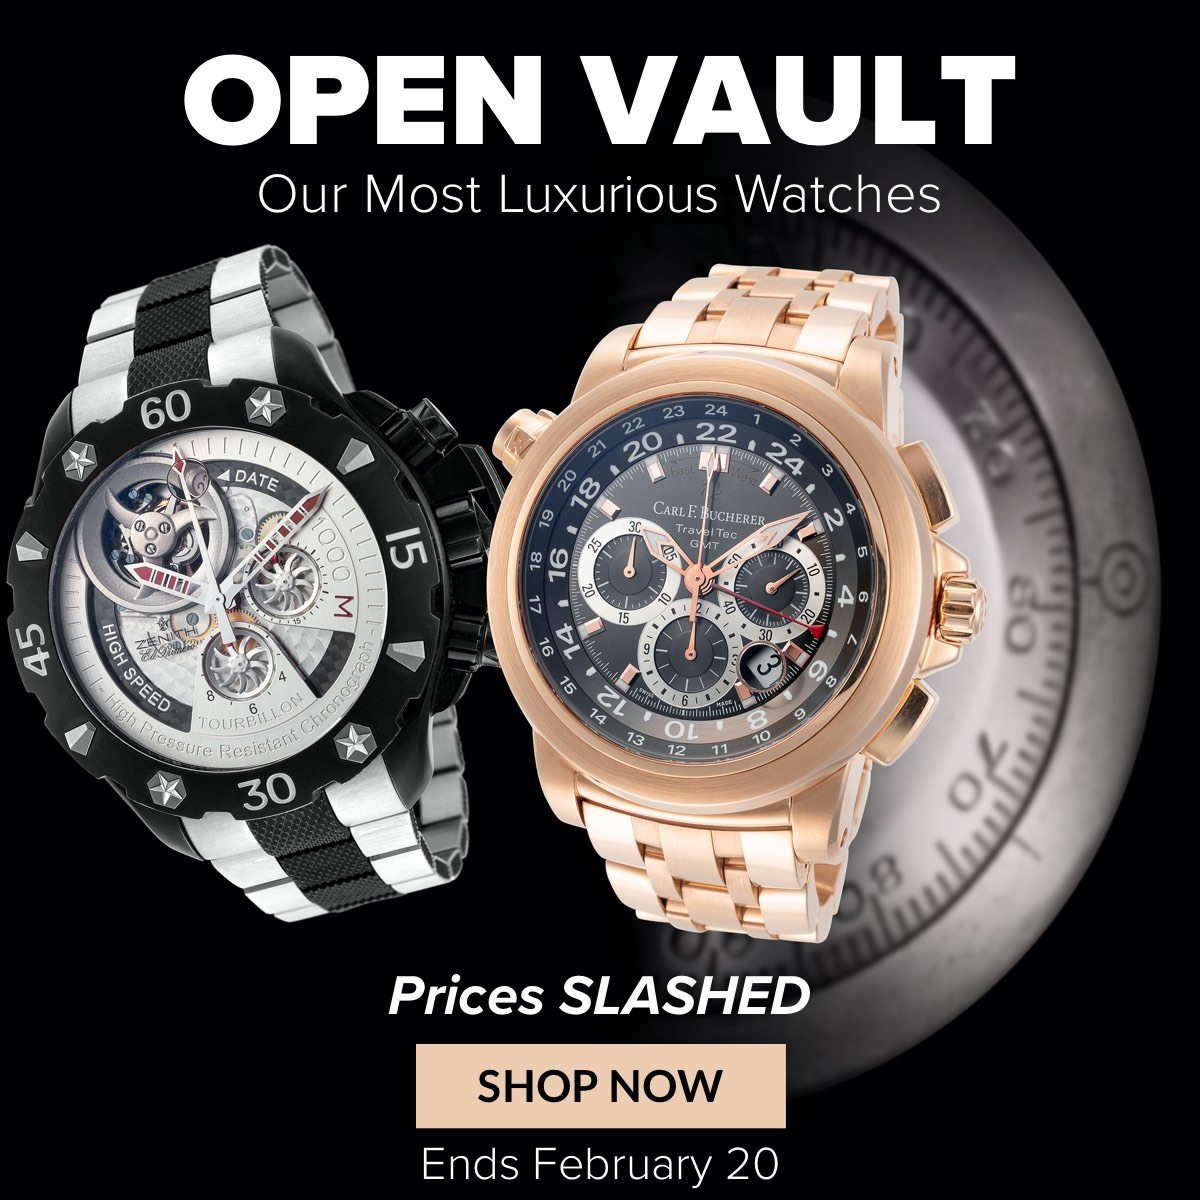 OPEN VAULT Our Most Luxurious Watches Now Slashed! Ends February 20